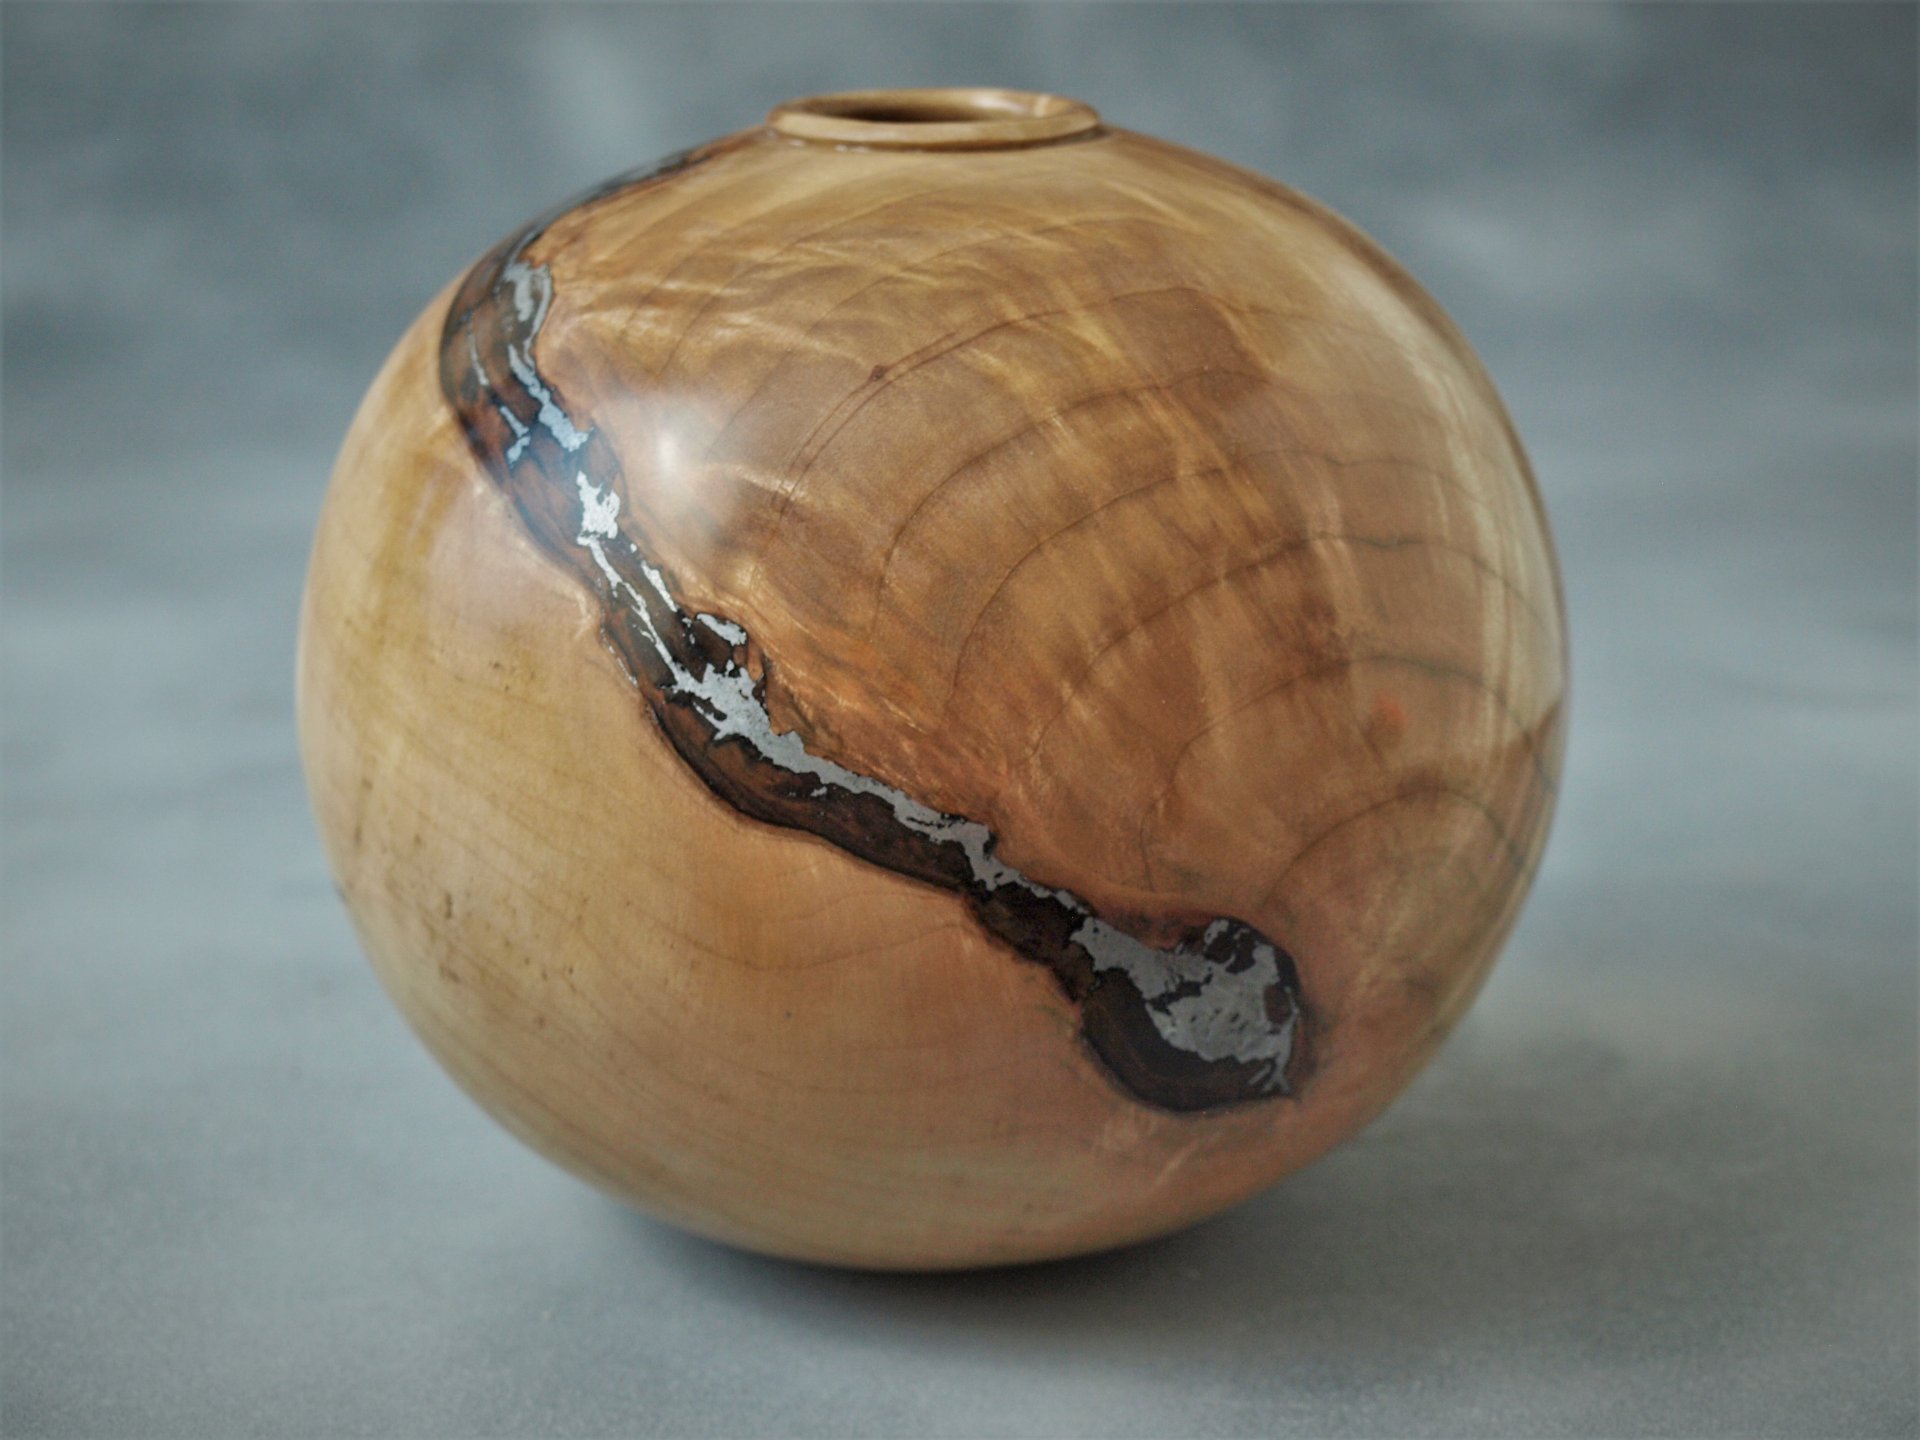 Maple Burl with metal inlay